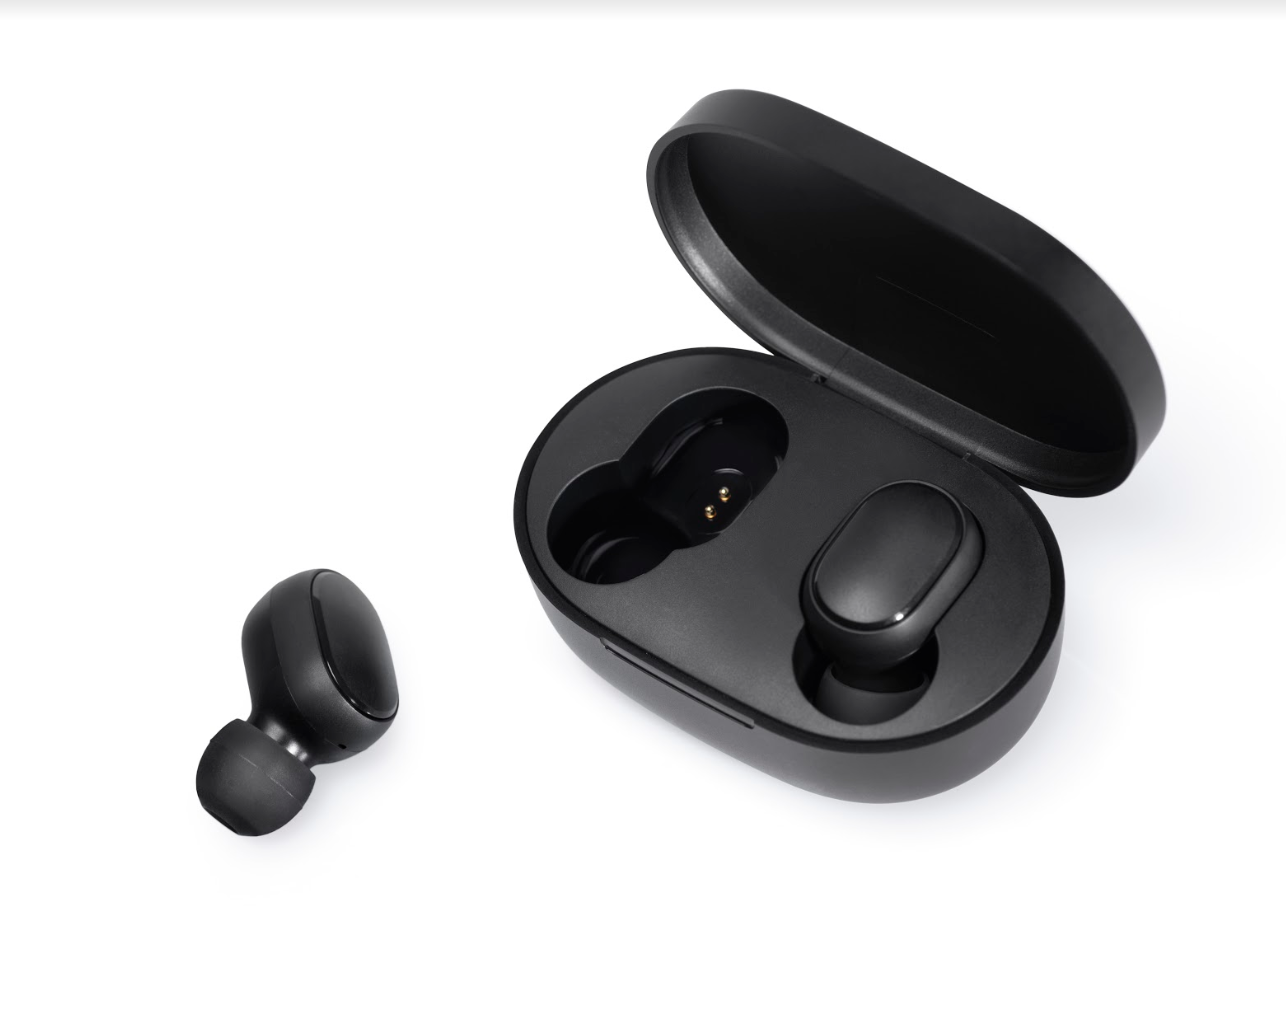 Redmi Earbuds S, (With Mic, In-Ear, Wireless, With Noise Cancellation, Supports Voice assistance, Sweat and Splash proof Headphones
)